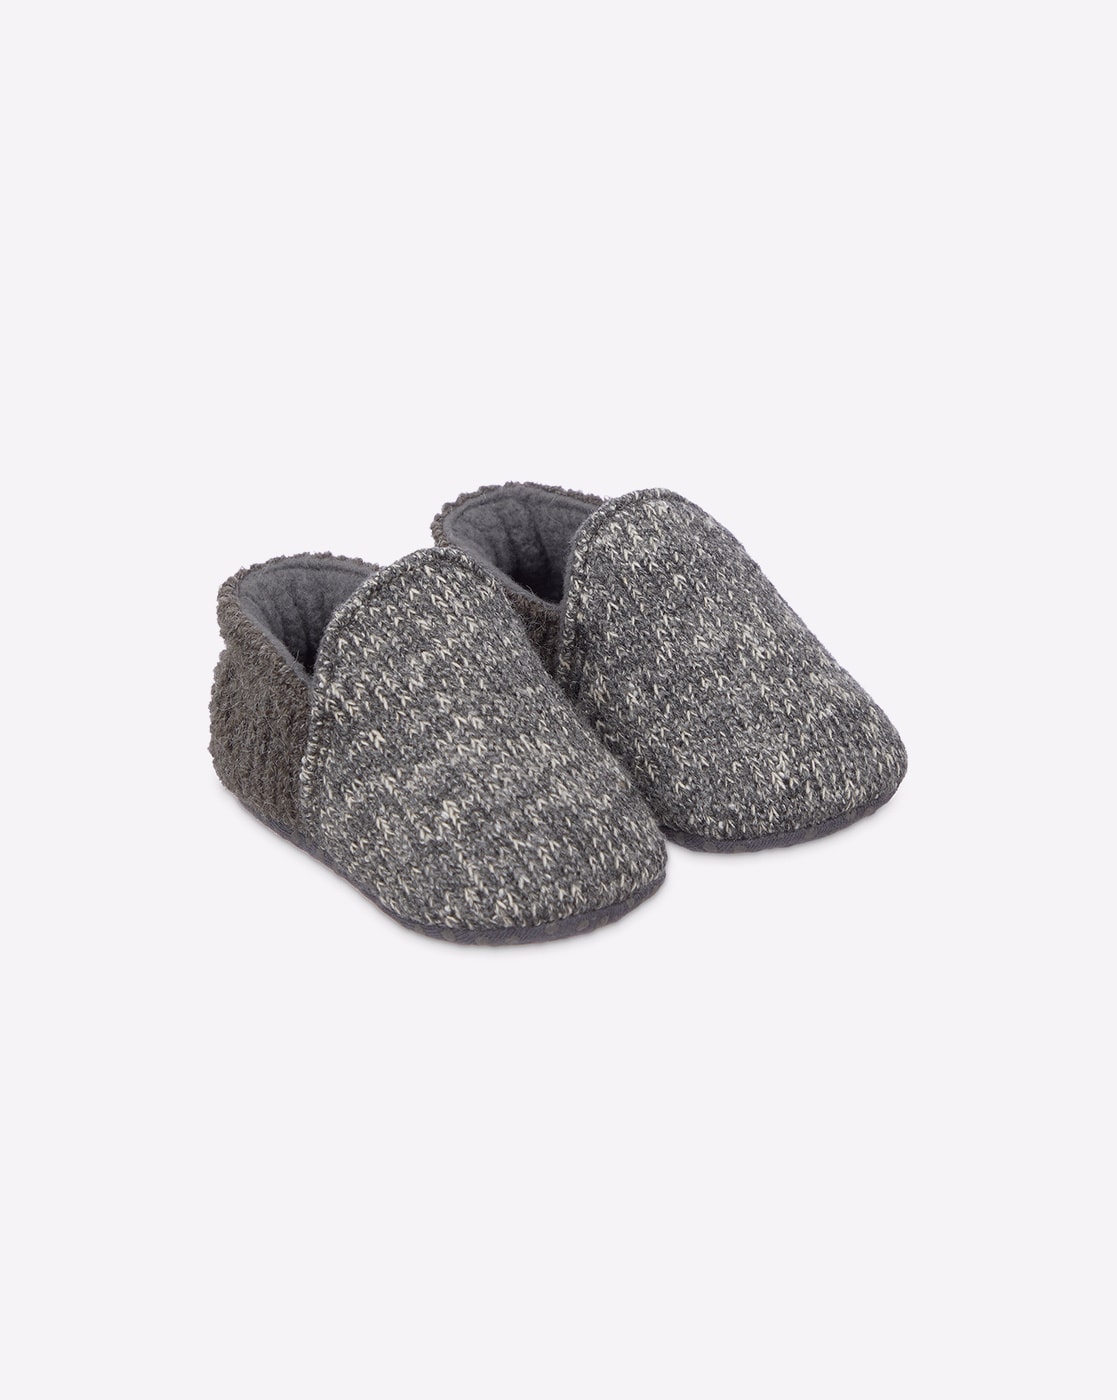 mothercare infant shoes